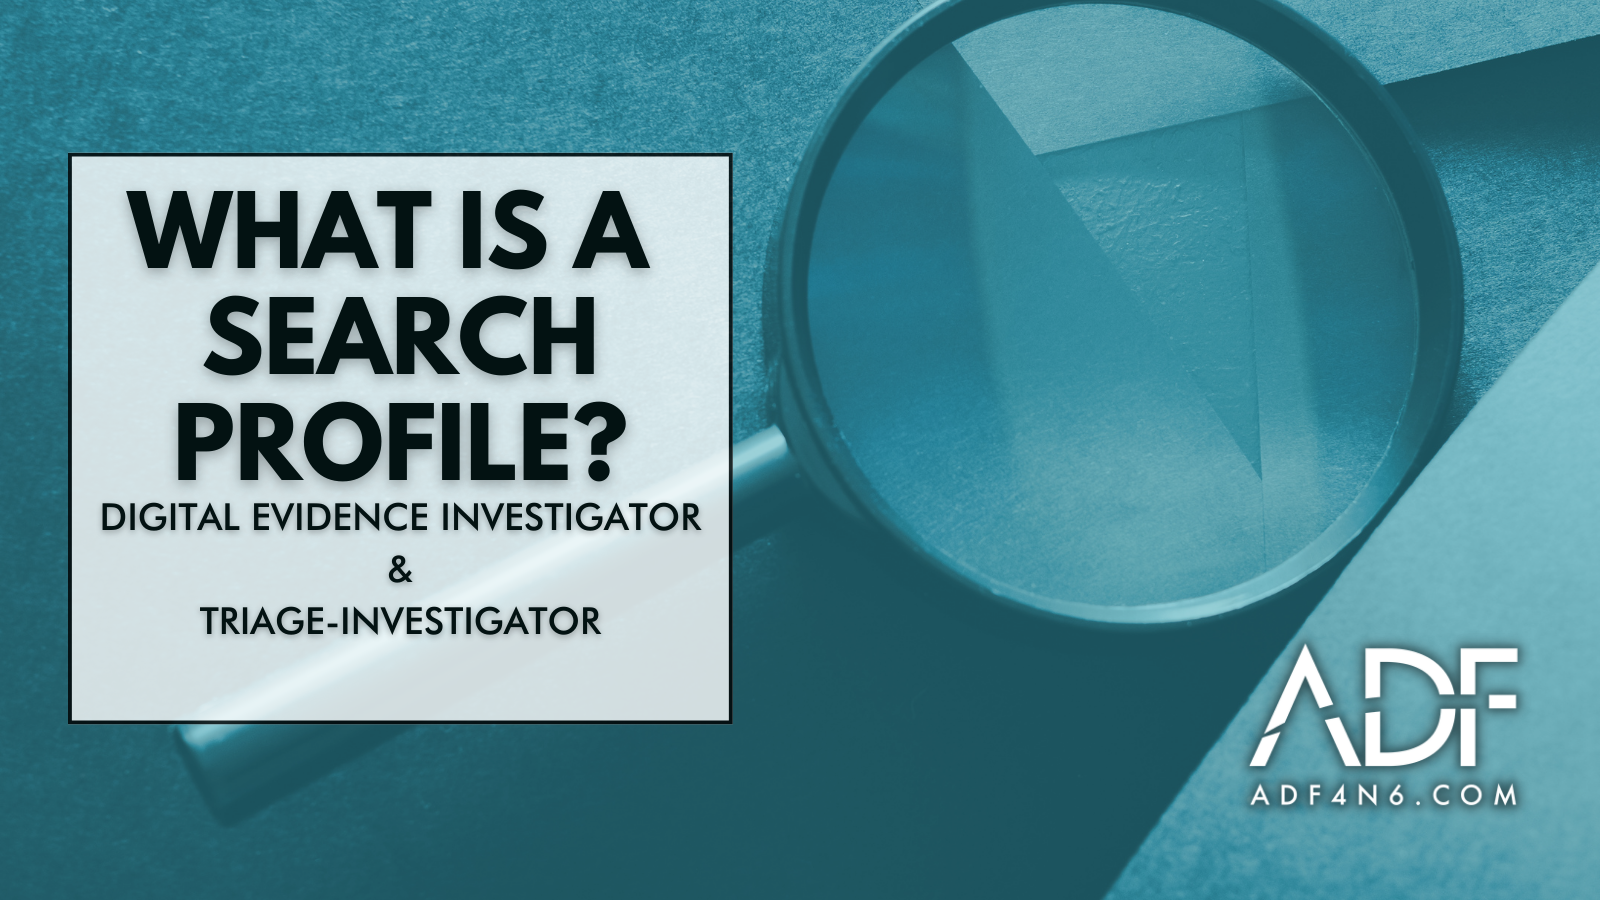 What is a Search Profile?